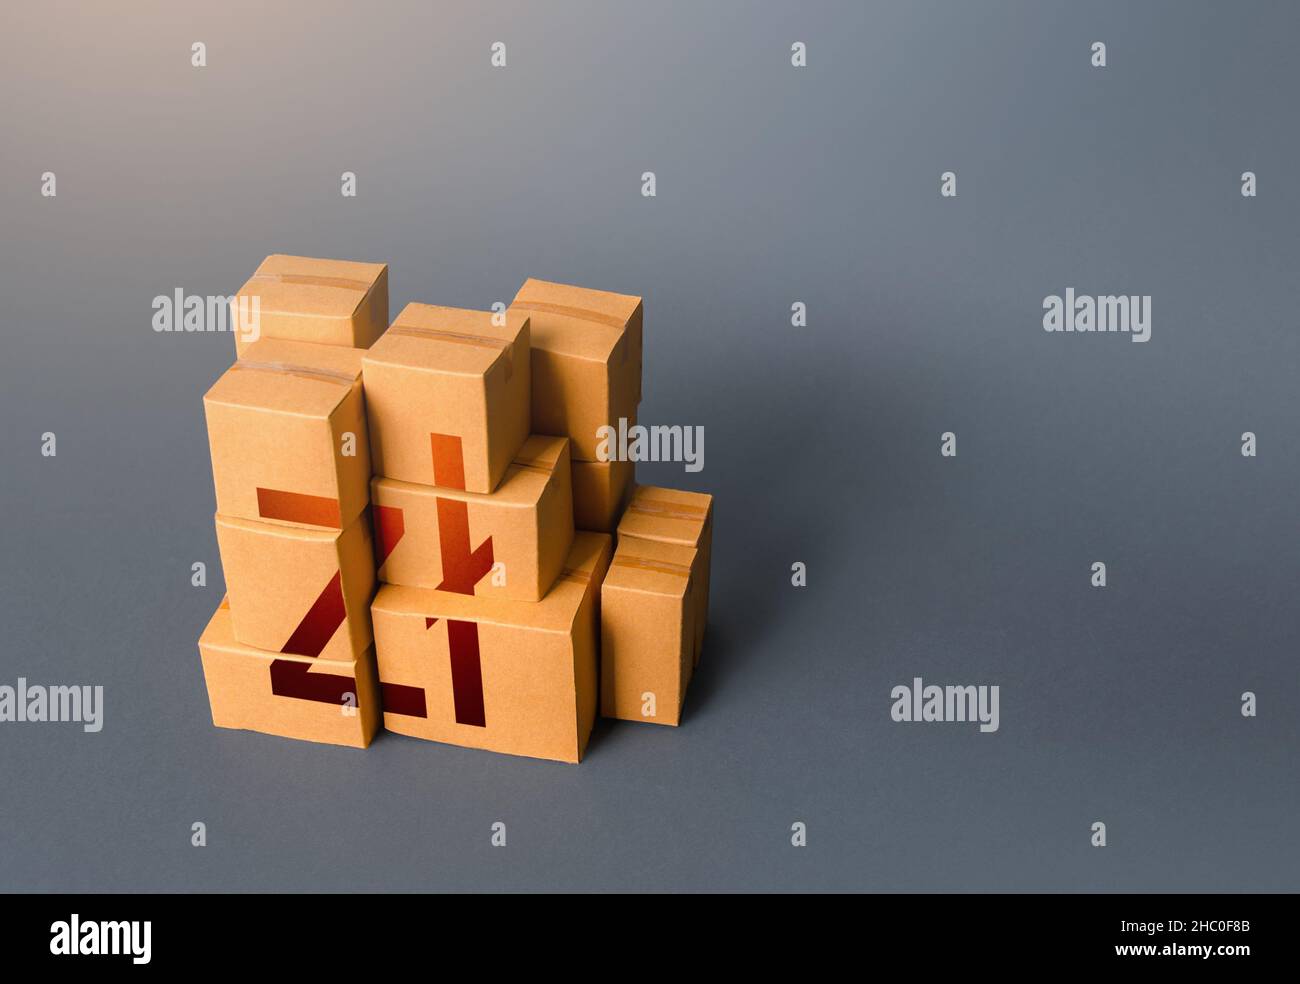 Boxes with polish zloty symbol. Distribution of goods. Transportation logistics. Retail of products. Consumption economics, imports and exports. Gross Stock Photo